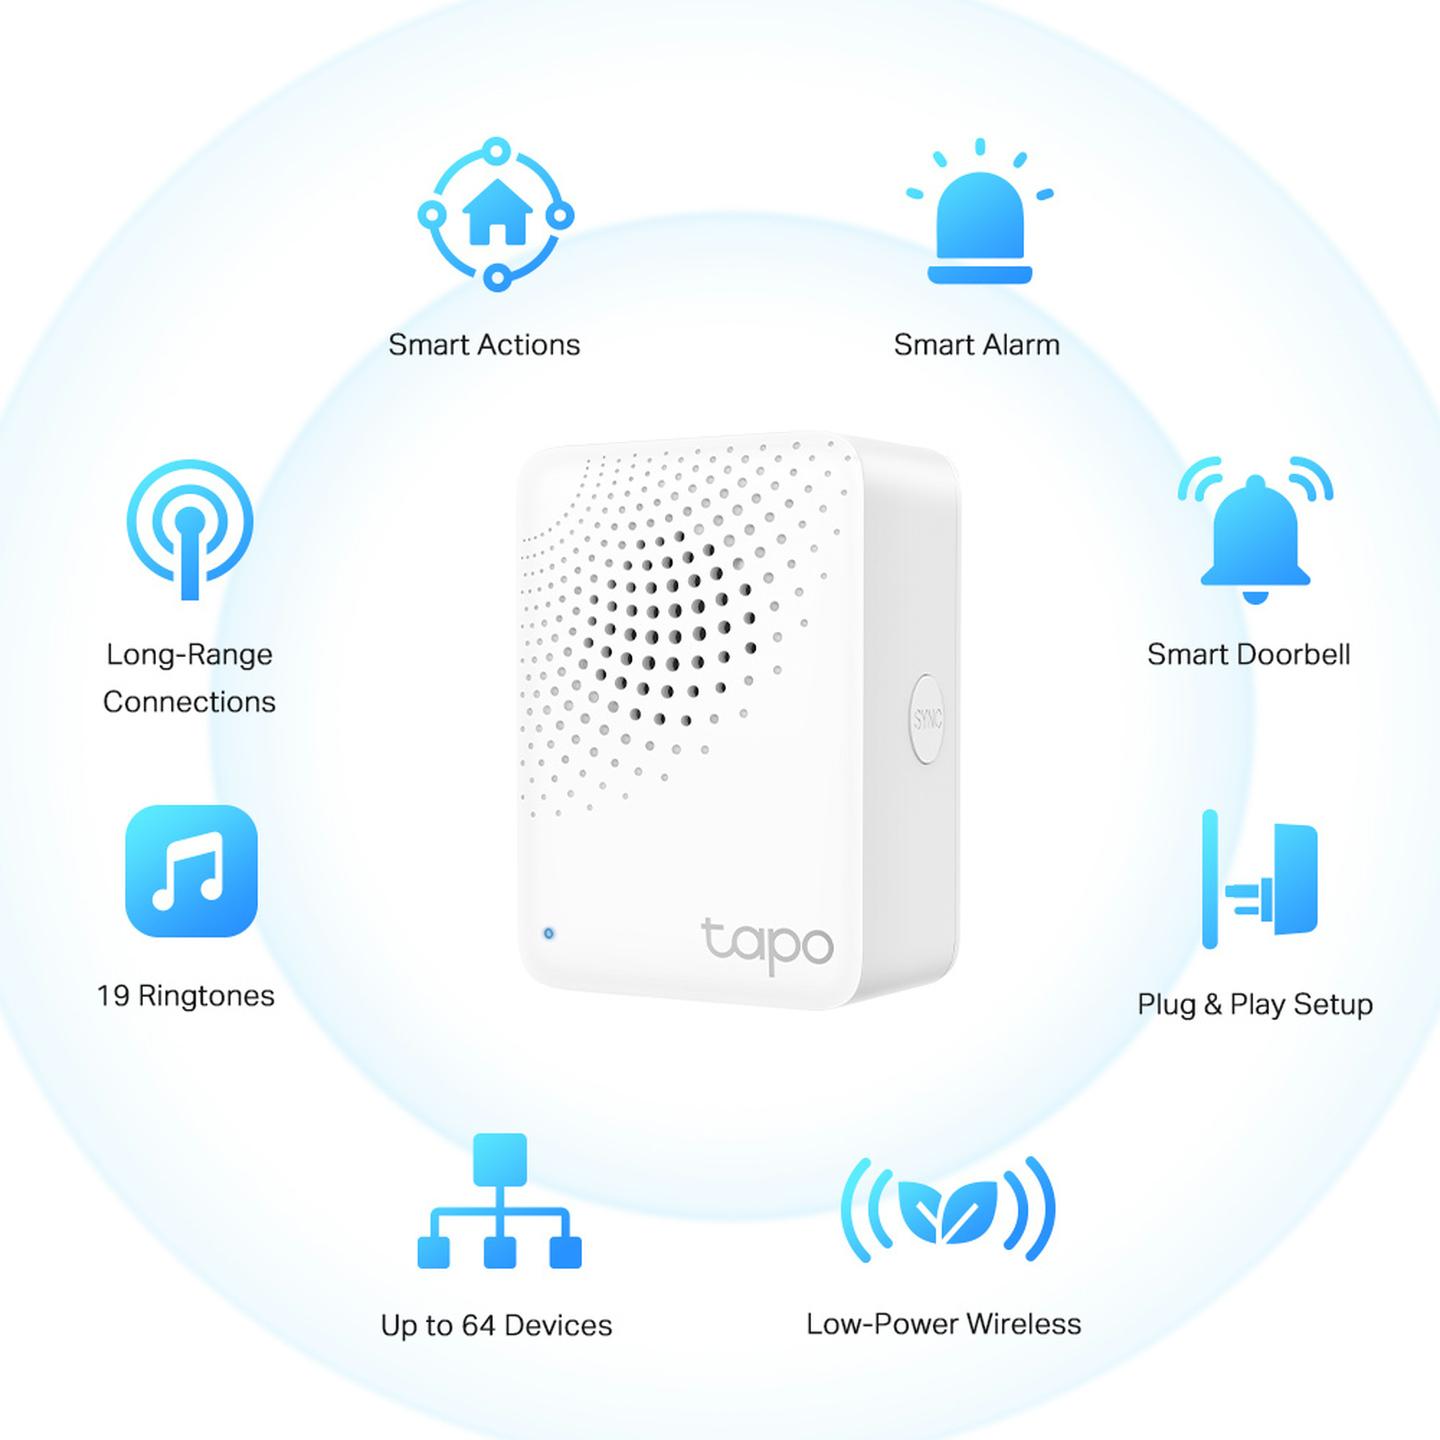 TP-LINK Tapo Smart Hub  with Chime WIFI